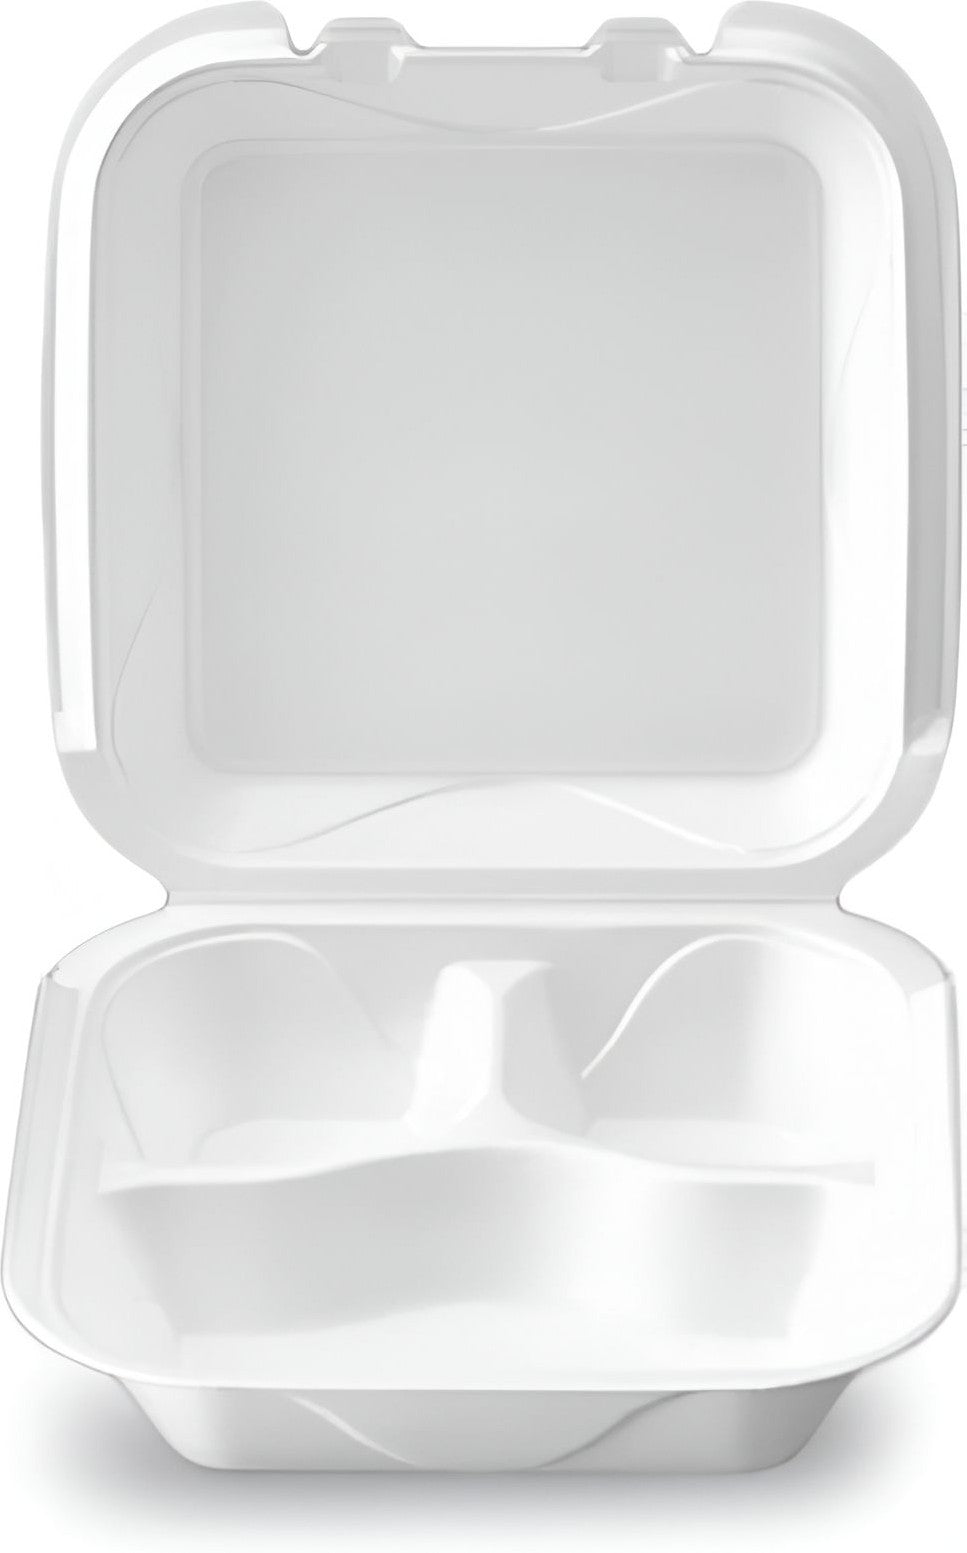 Darnel - 9.18" x 9.18" x 3" White Large Foam 3 Compartment Hinged Container, 200/Cs - DU4063101